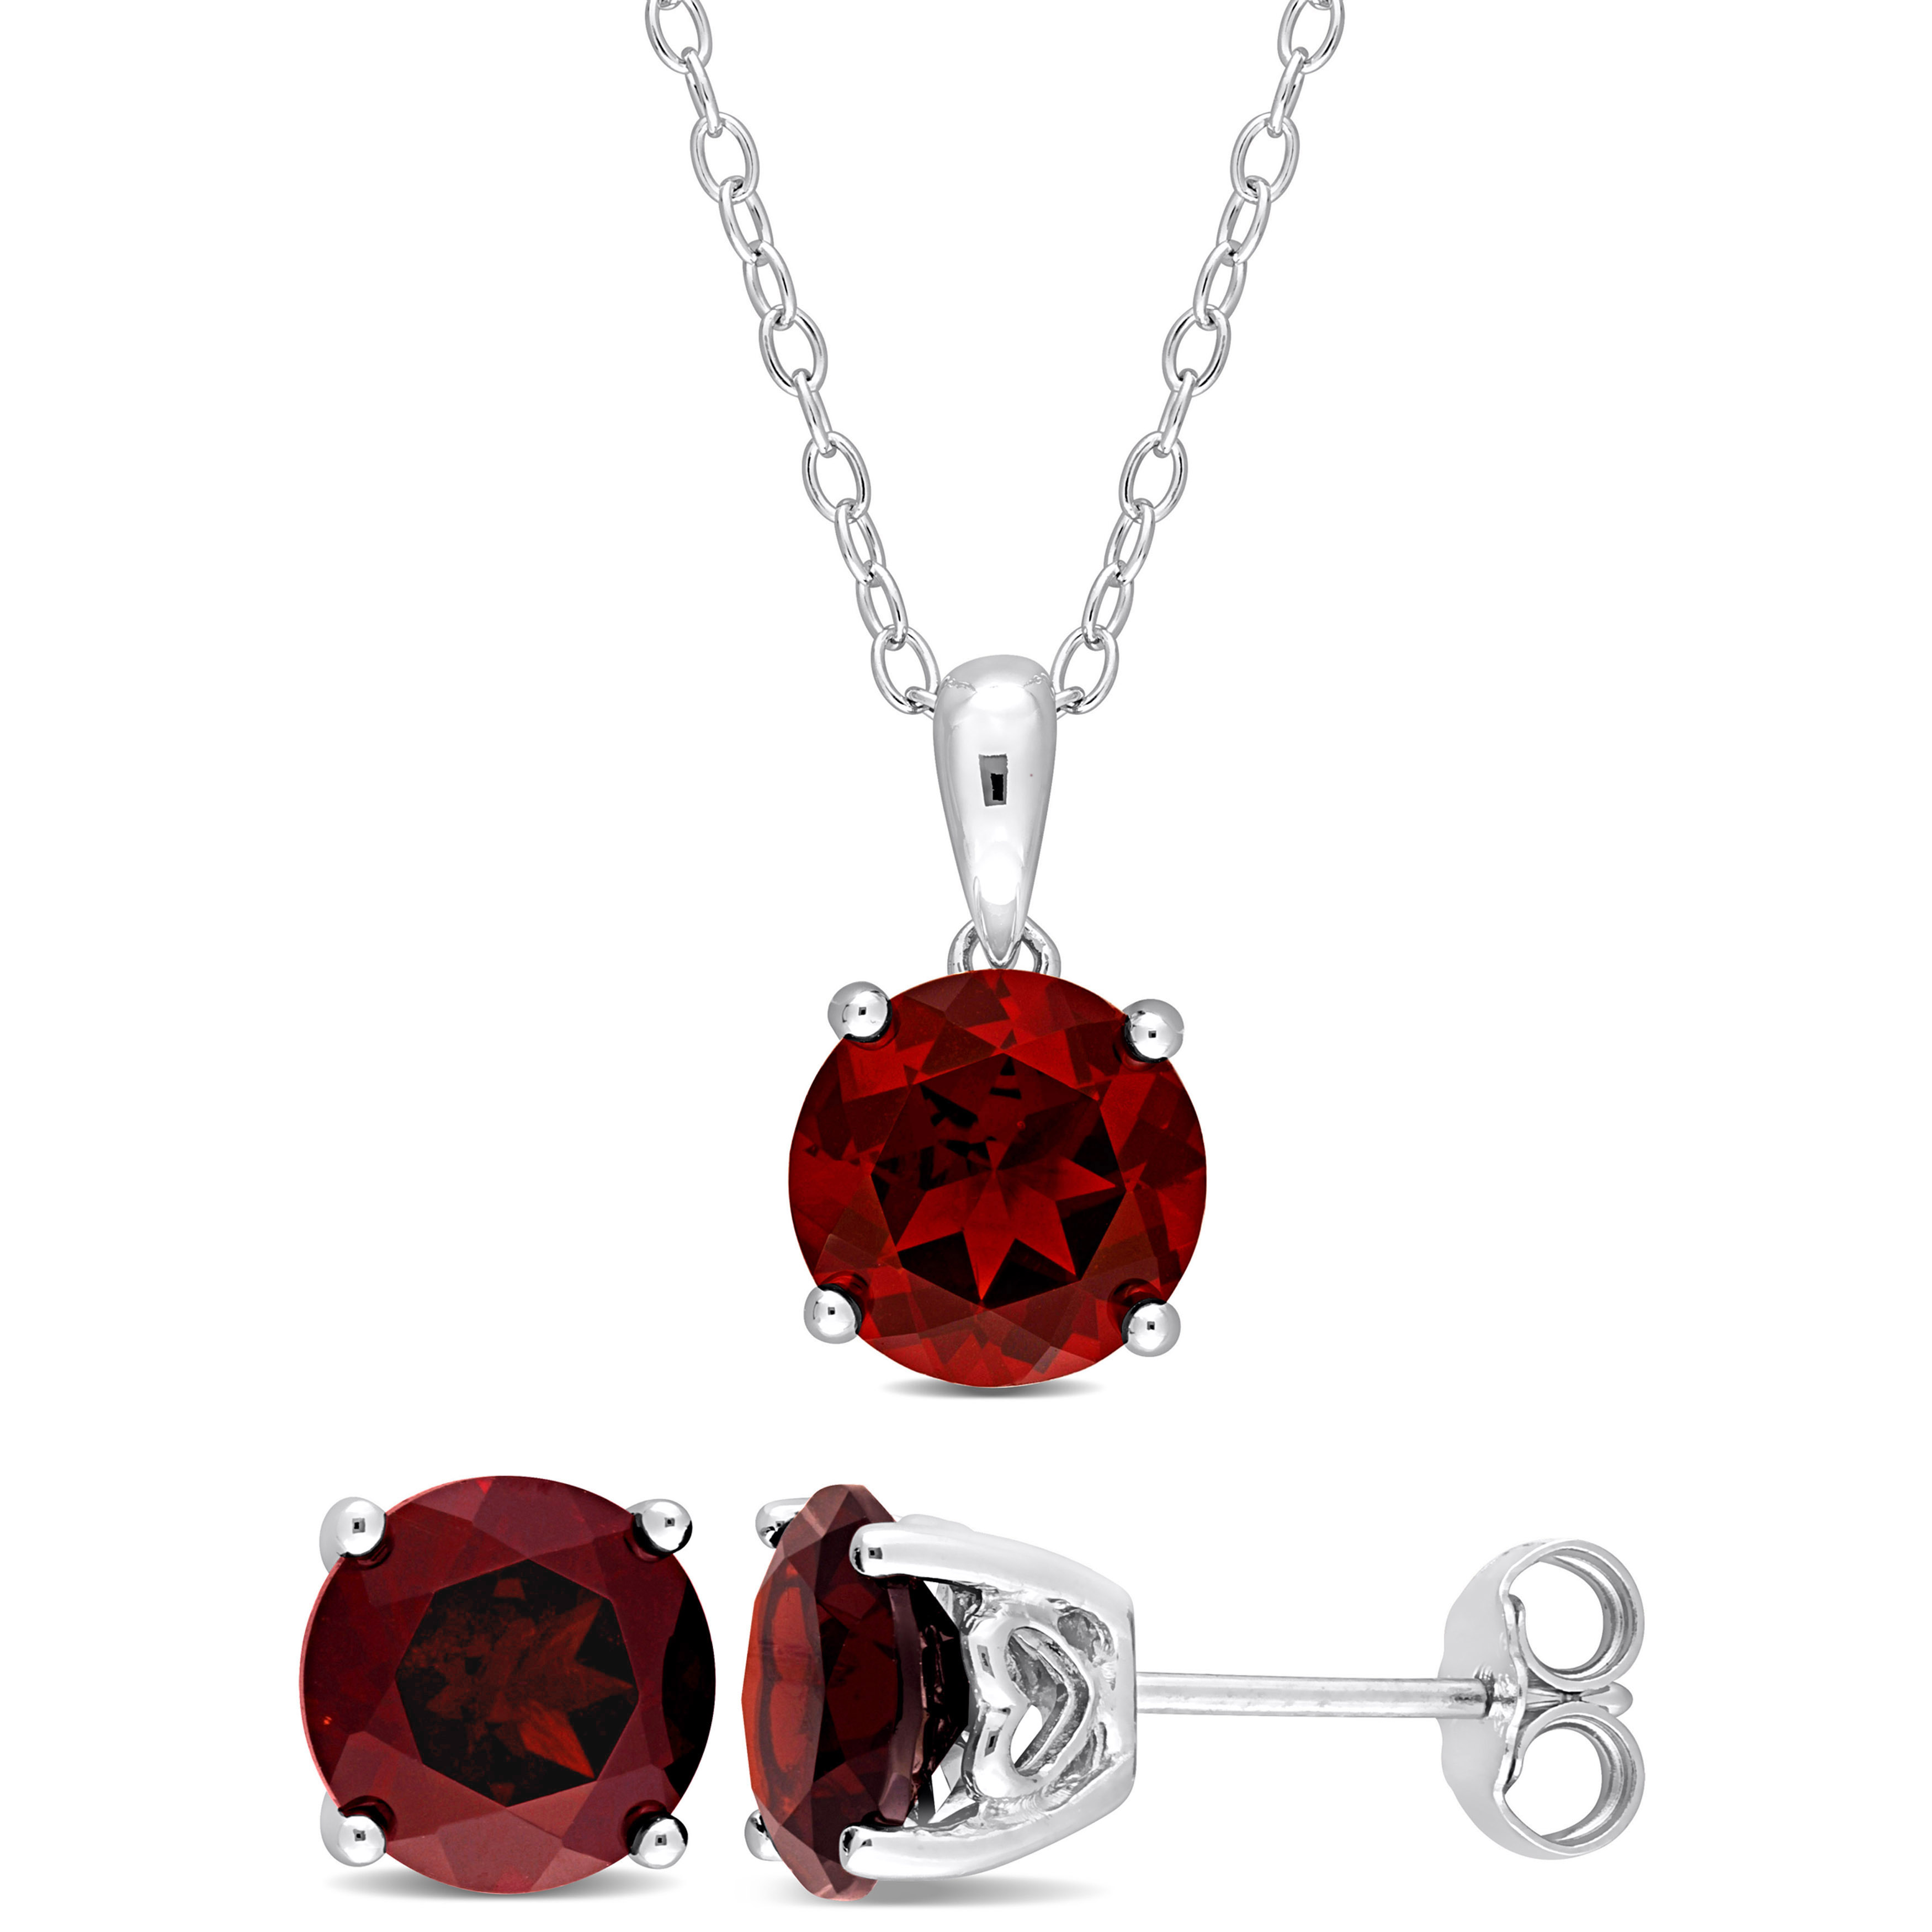 6 CT TGW Garnet 2-Piece Solitaire Pendant with Chain and Stud Earrings Set in Sterling Silver